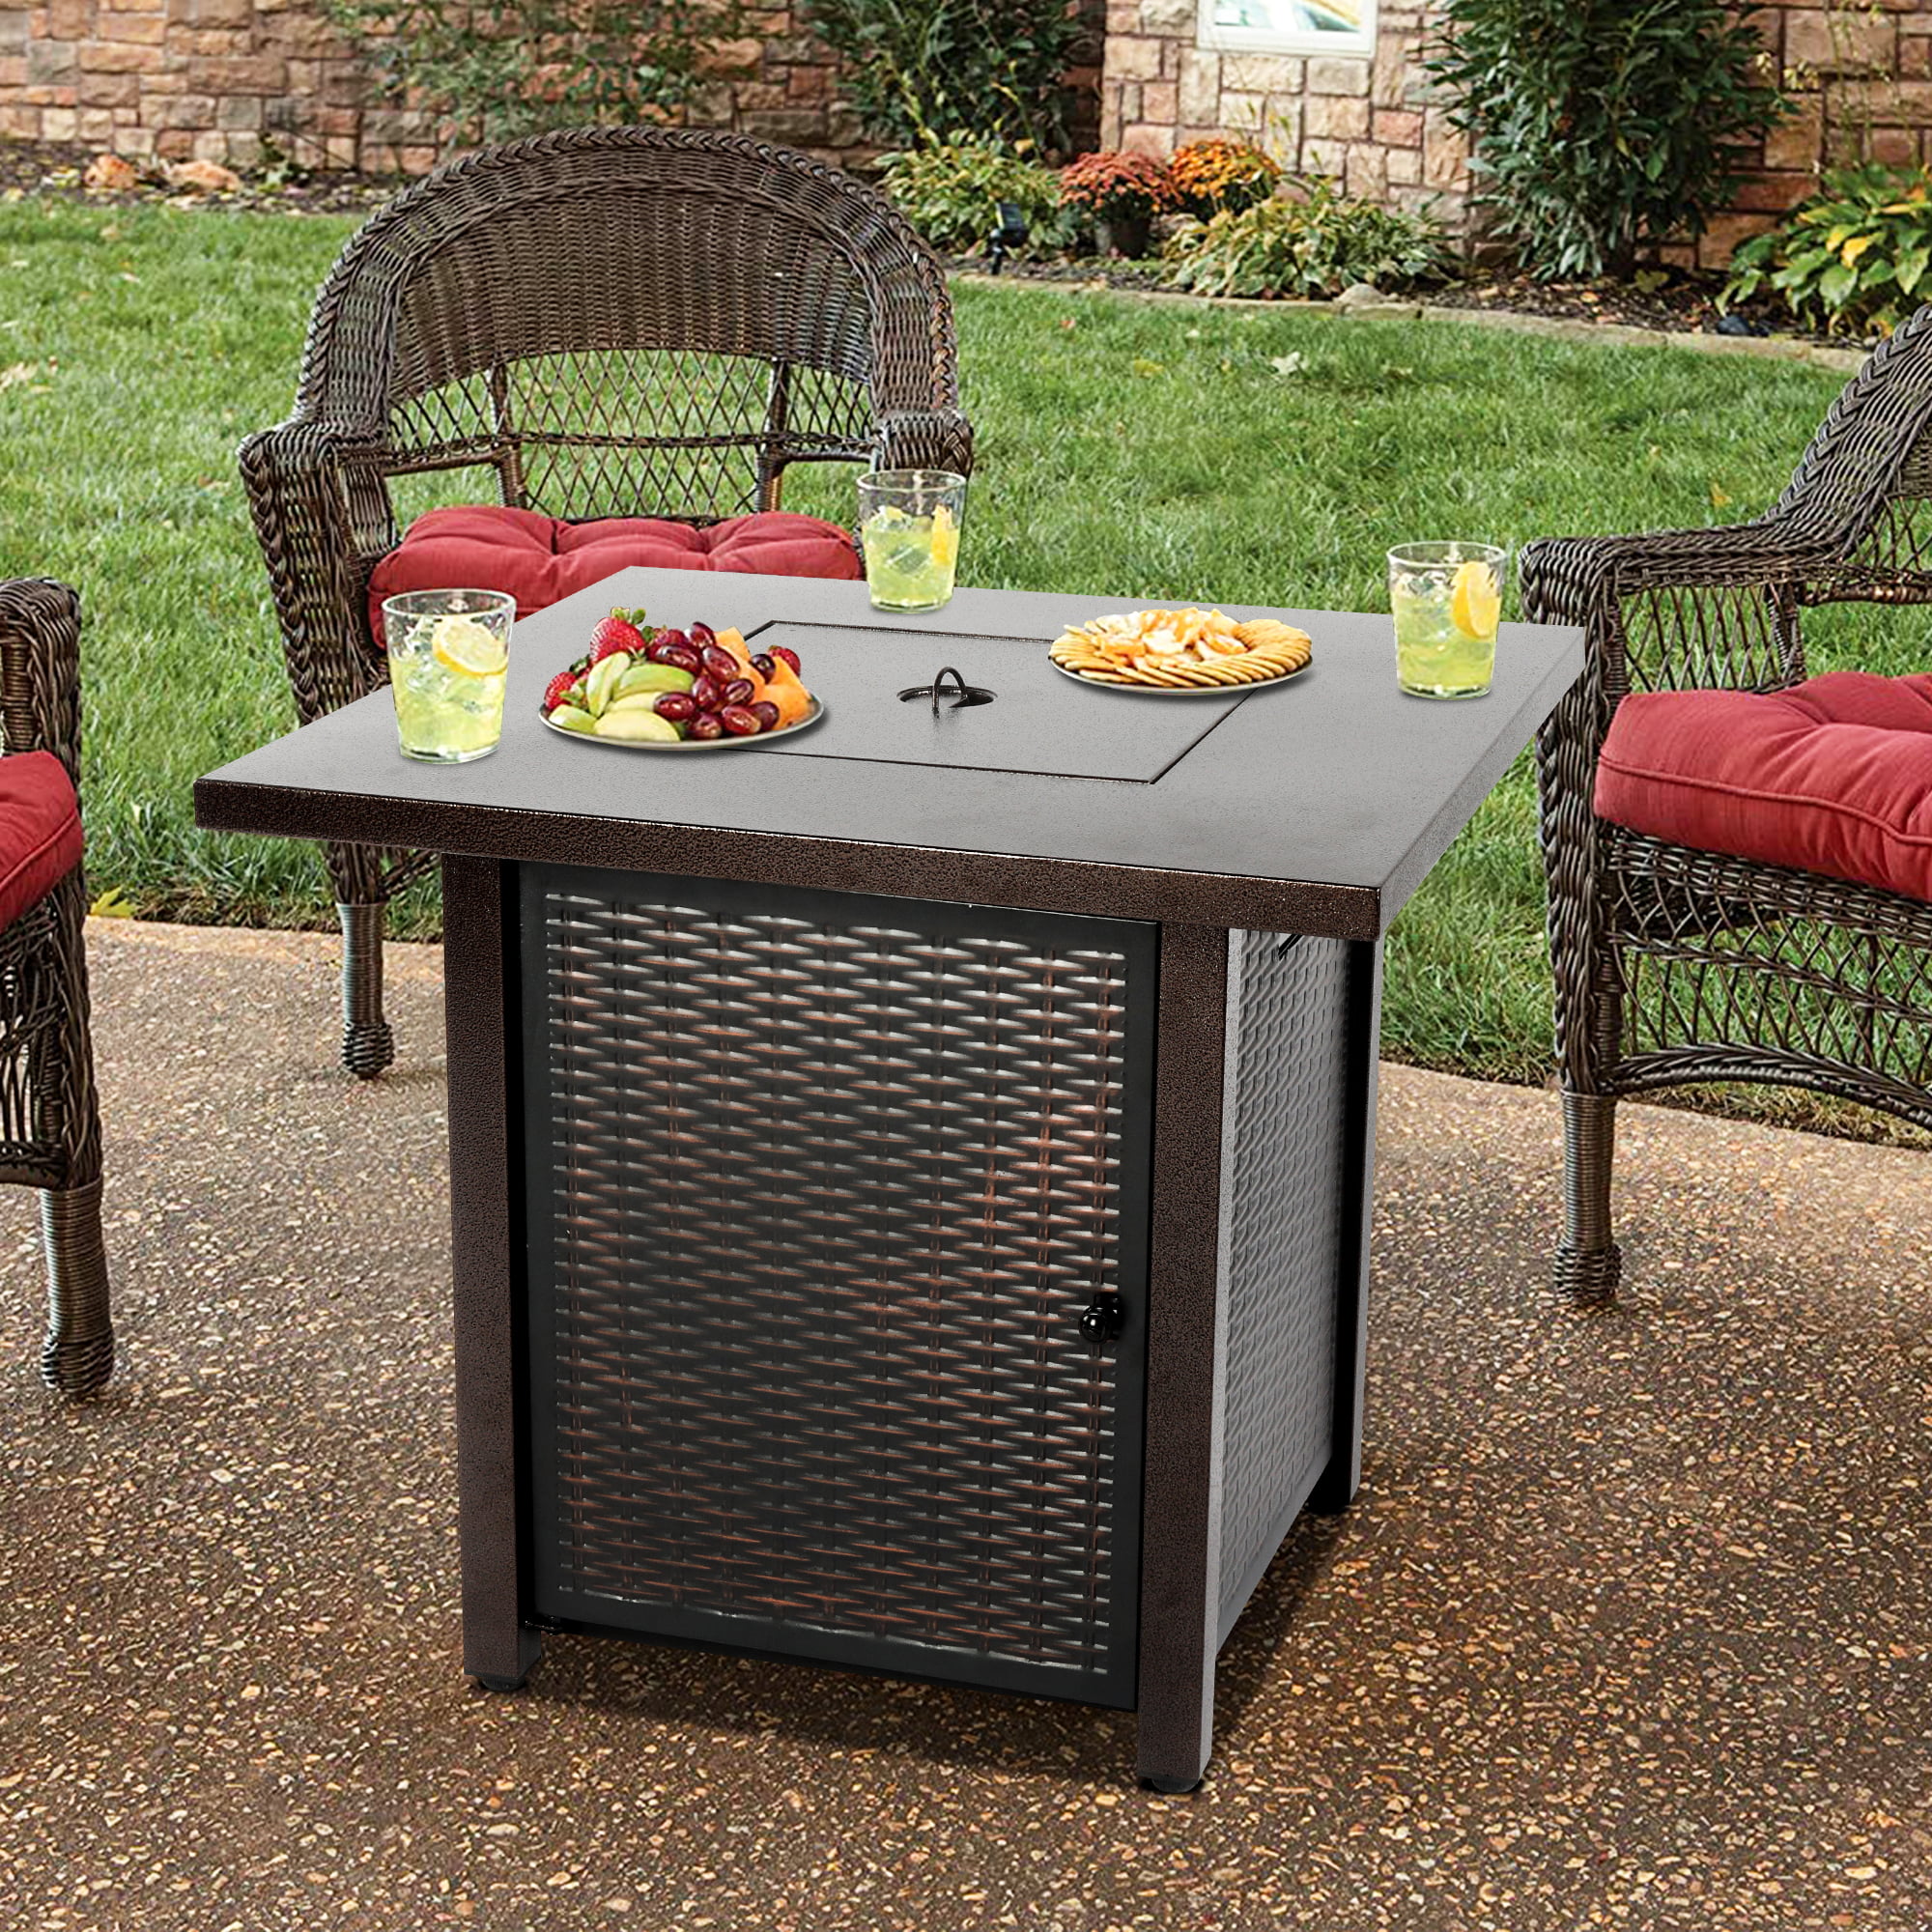 Patio Deck Propane Gas Fire Pit Table, Is It Safe To Use A Gas Fire Pit On Deck